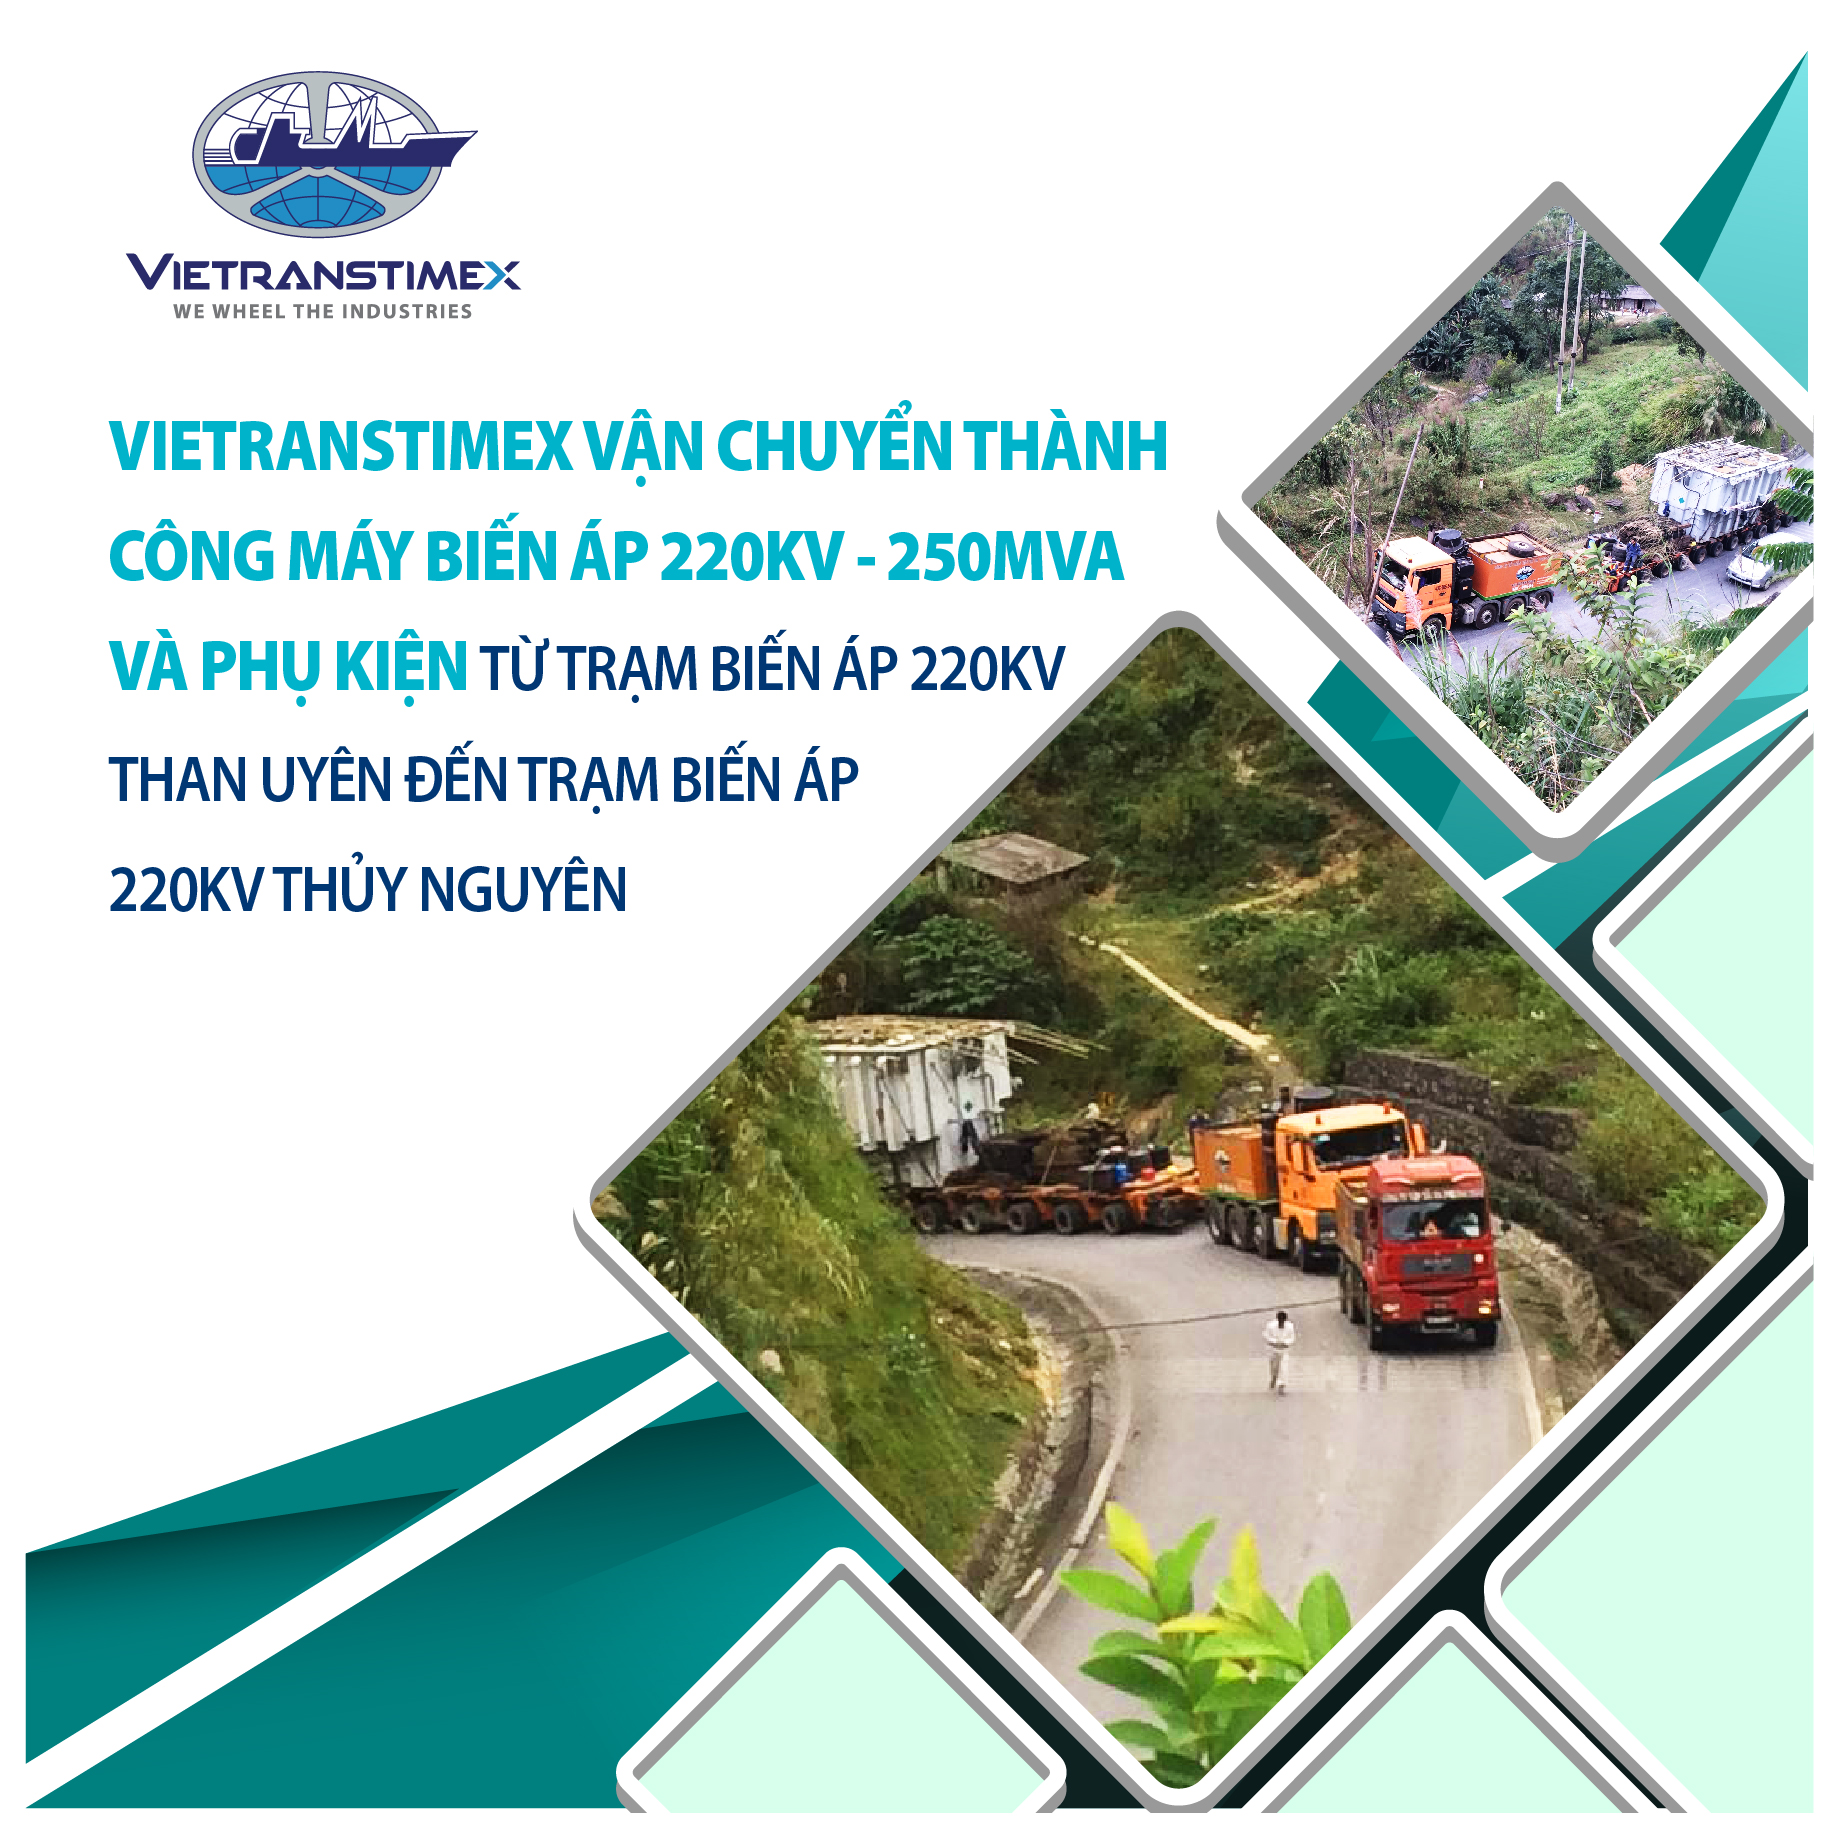 Vietranstimex Successfully Transported The 220Kv – 250MVA Transformer And Associated Fittings From 220Kv Than Uyen Substation To  220Kv Thuy Nguyen Substation